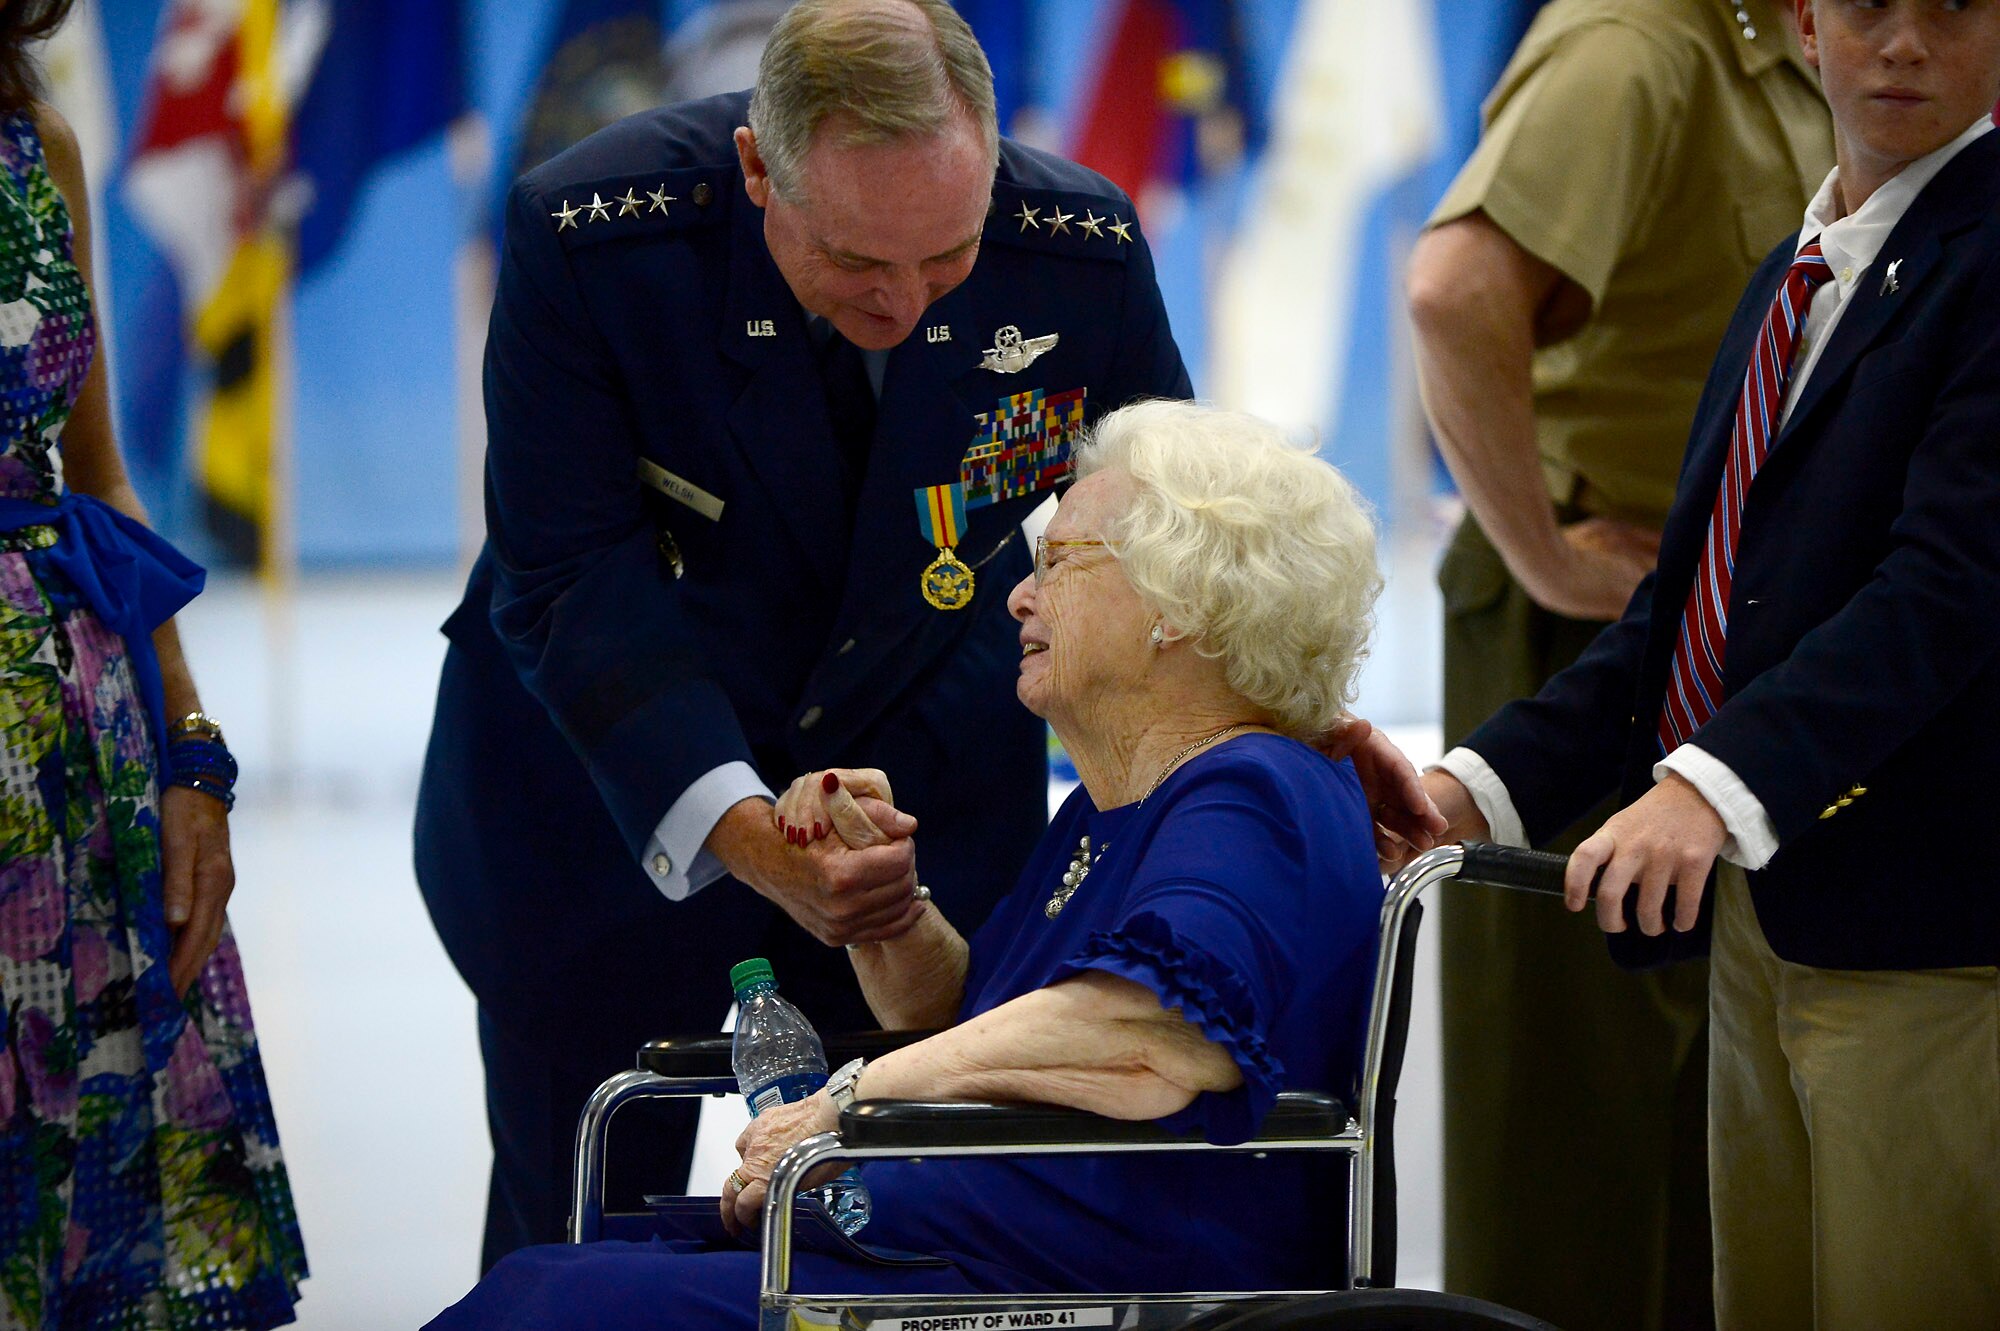 Air Force Chief of Staff Gen. Mark A. Welsh III has a moment with his mother following his retirement ceremony at Joint Base Andrews, Md., June 24, 2016. Welsh has served as the 20th chief of staff since 2012. (U.S. Air Force photo/Tech. Sgt. Joshua L. DeMotts)